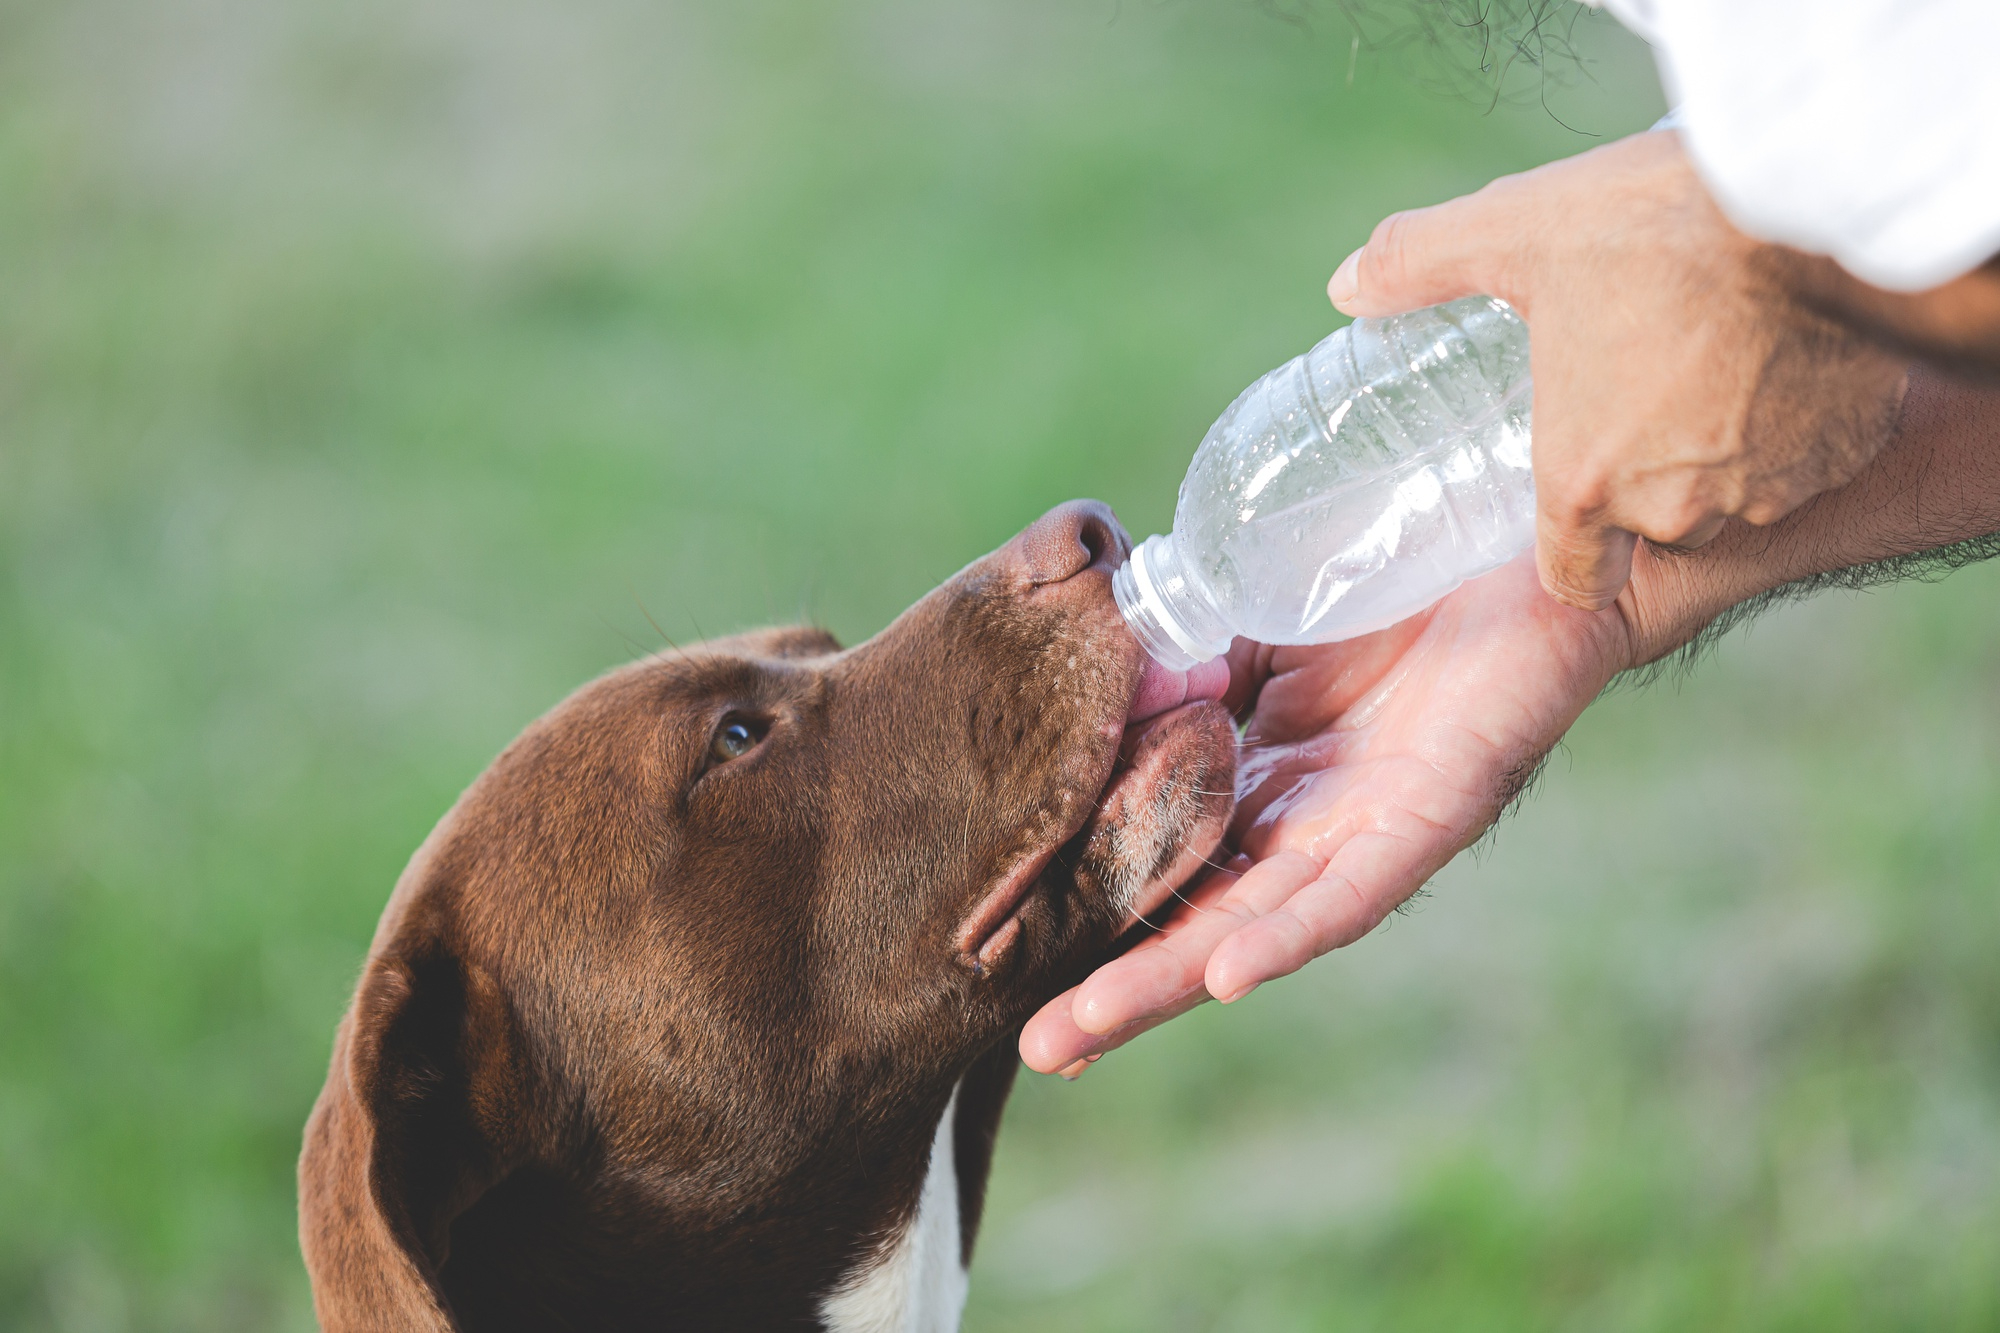 A beagle dog being fed a bottle of water on a hot sunny day